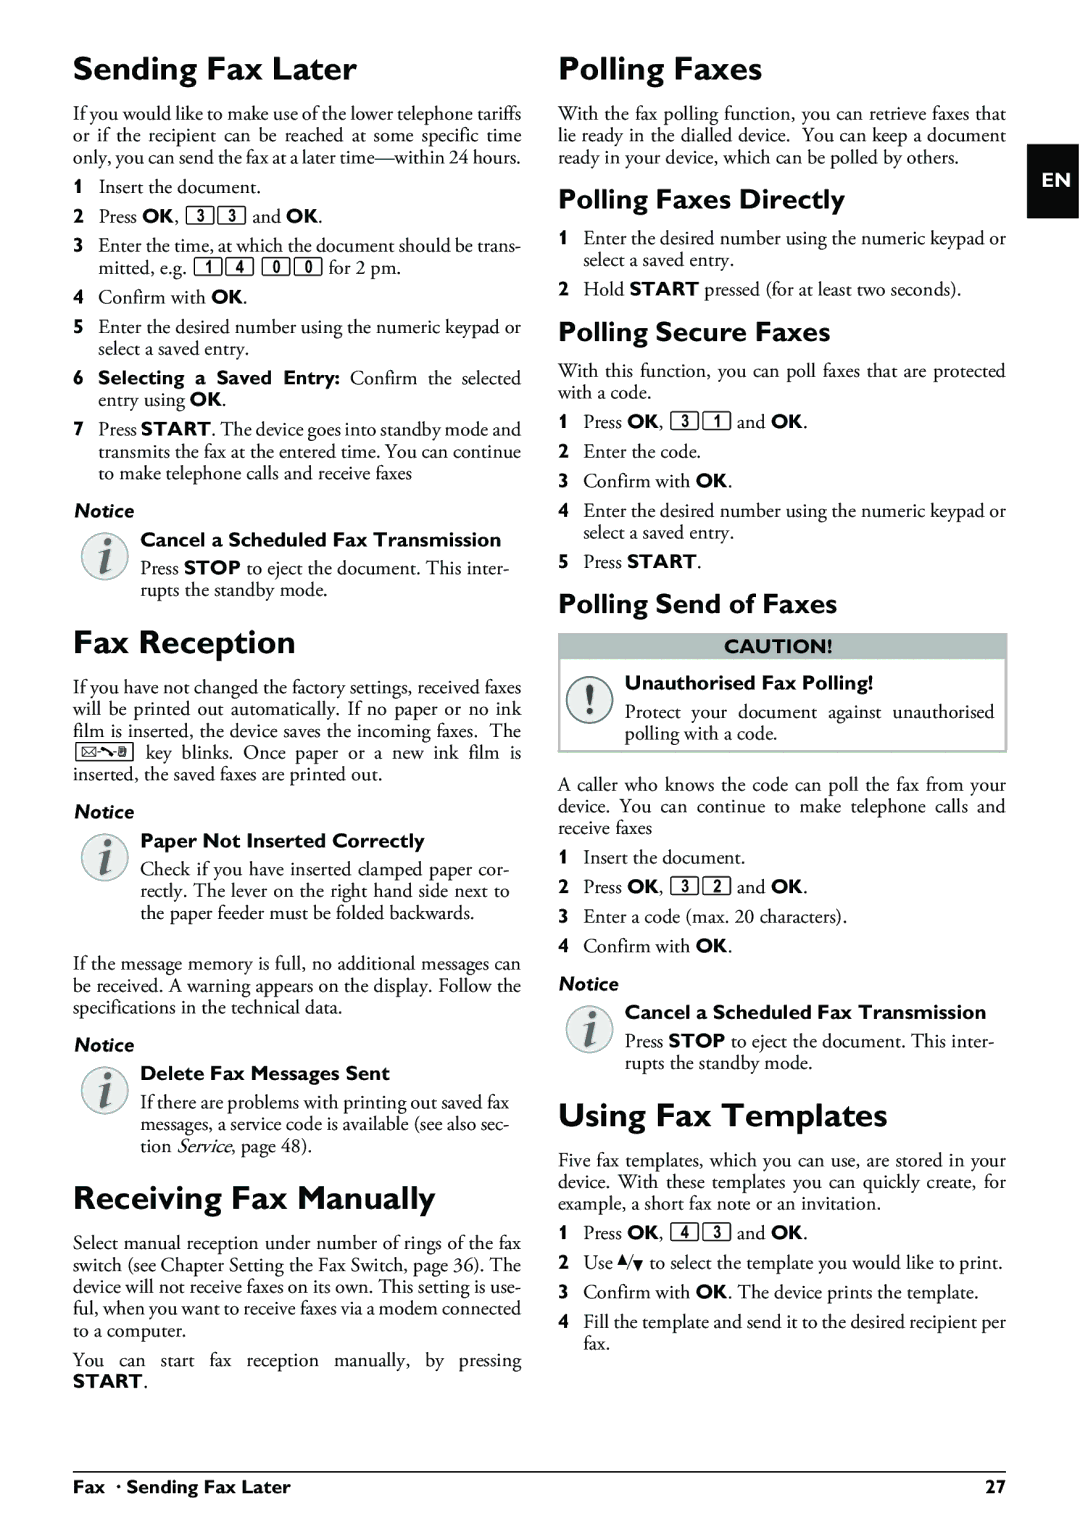 Philips PPF 650 user manual Sending Fax Later, Fax Reception, Receiving Fax Manually, Polling Faxes, Using Fax Templates 